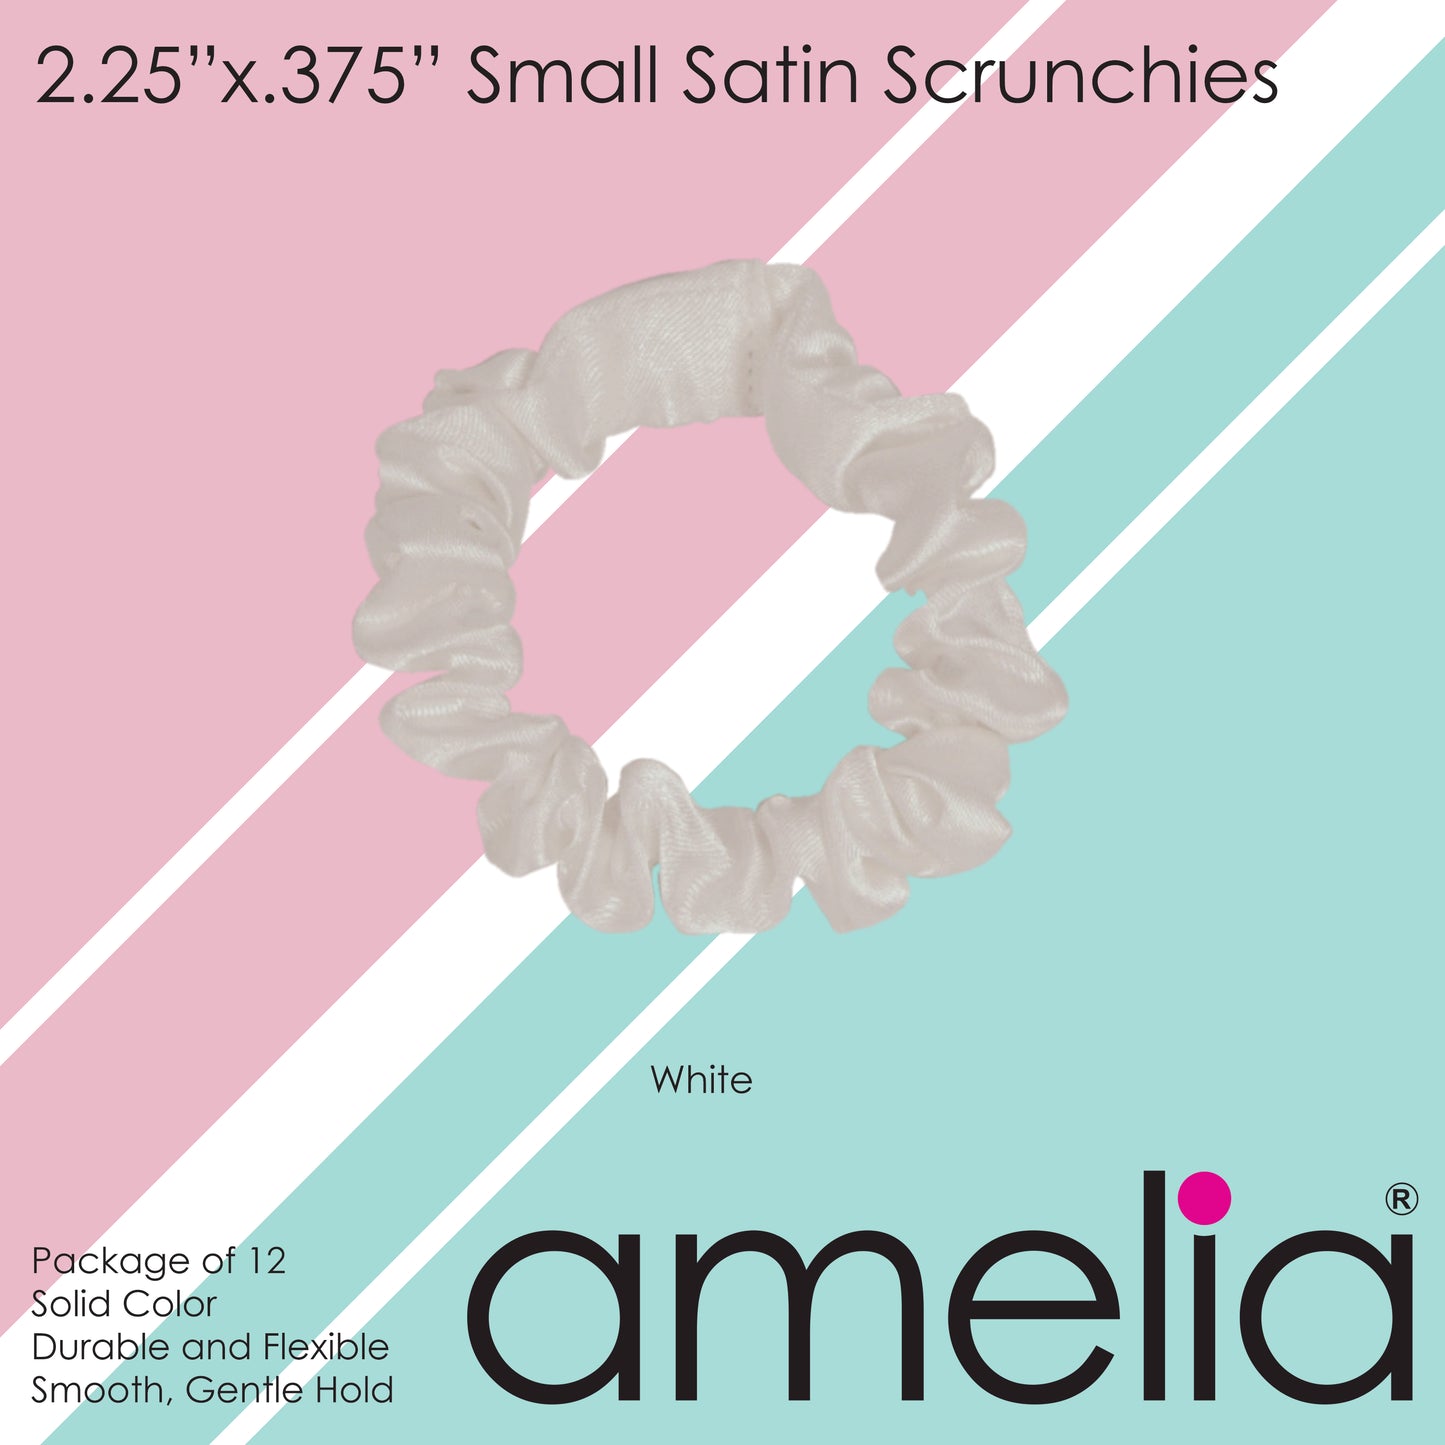 Amelia Beauty, White Satin Scrunchies, 2.25in Diameter, Gentle on Hair, Strong Hold, No Snag, No Dents or Creases. 12 Pack